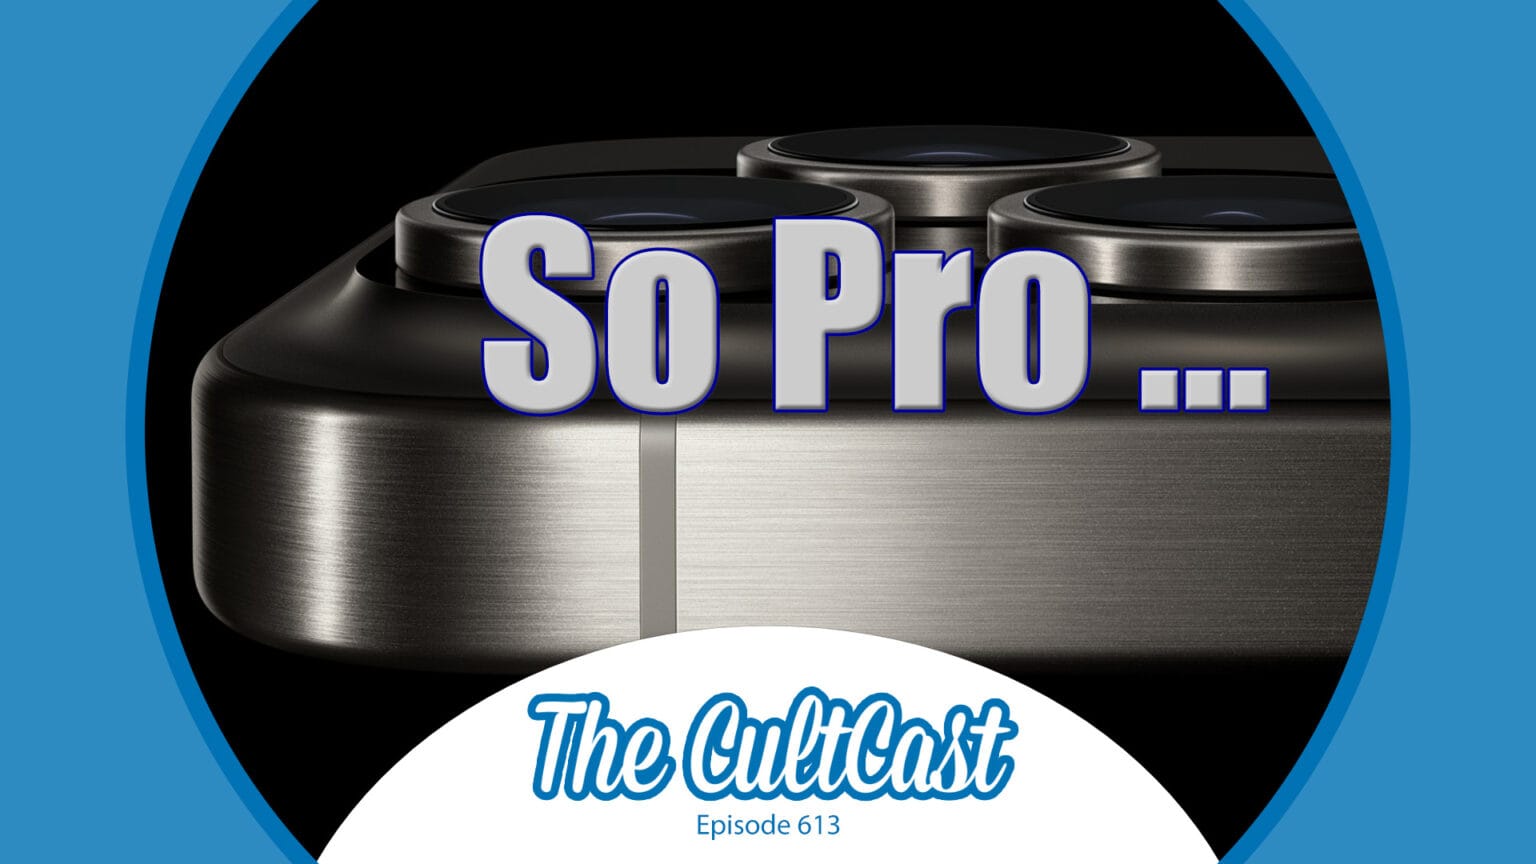 The CultCast episode 613: iPhone 15 Pro is so pro ...